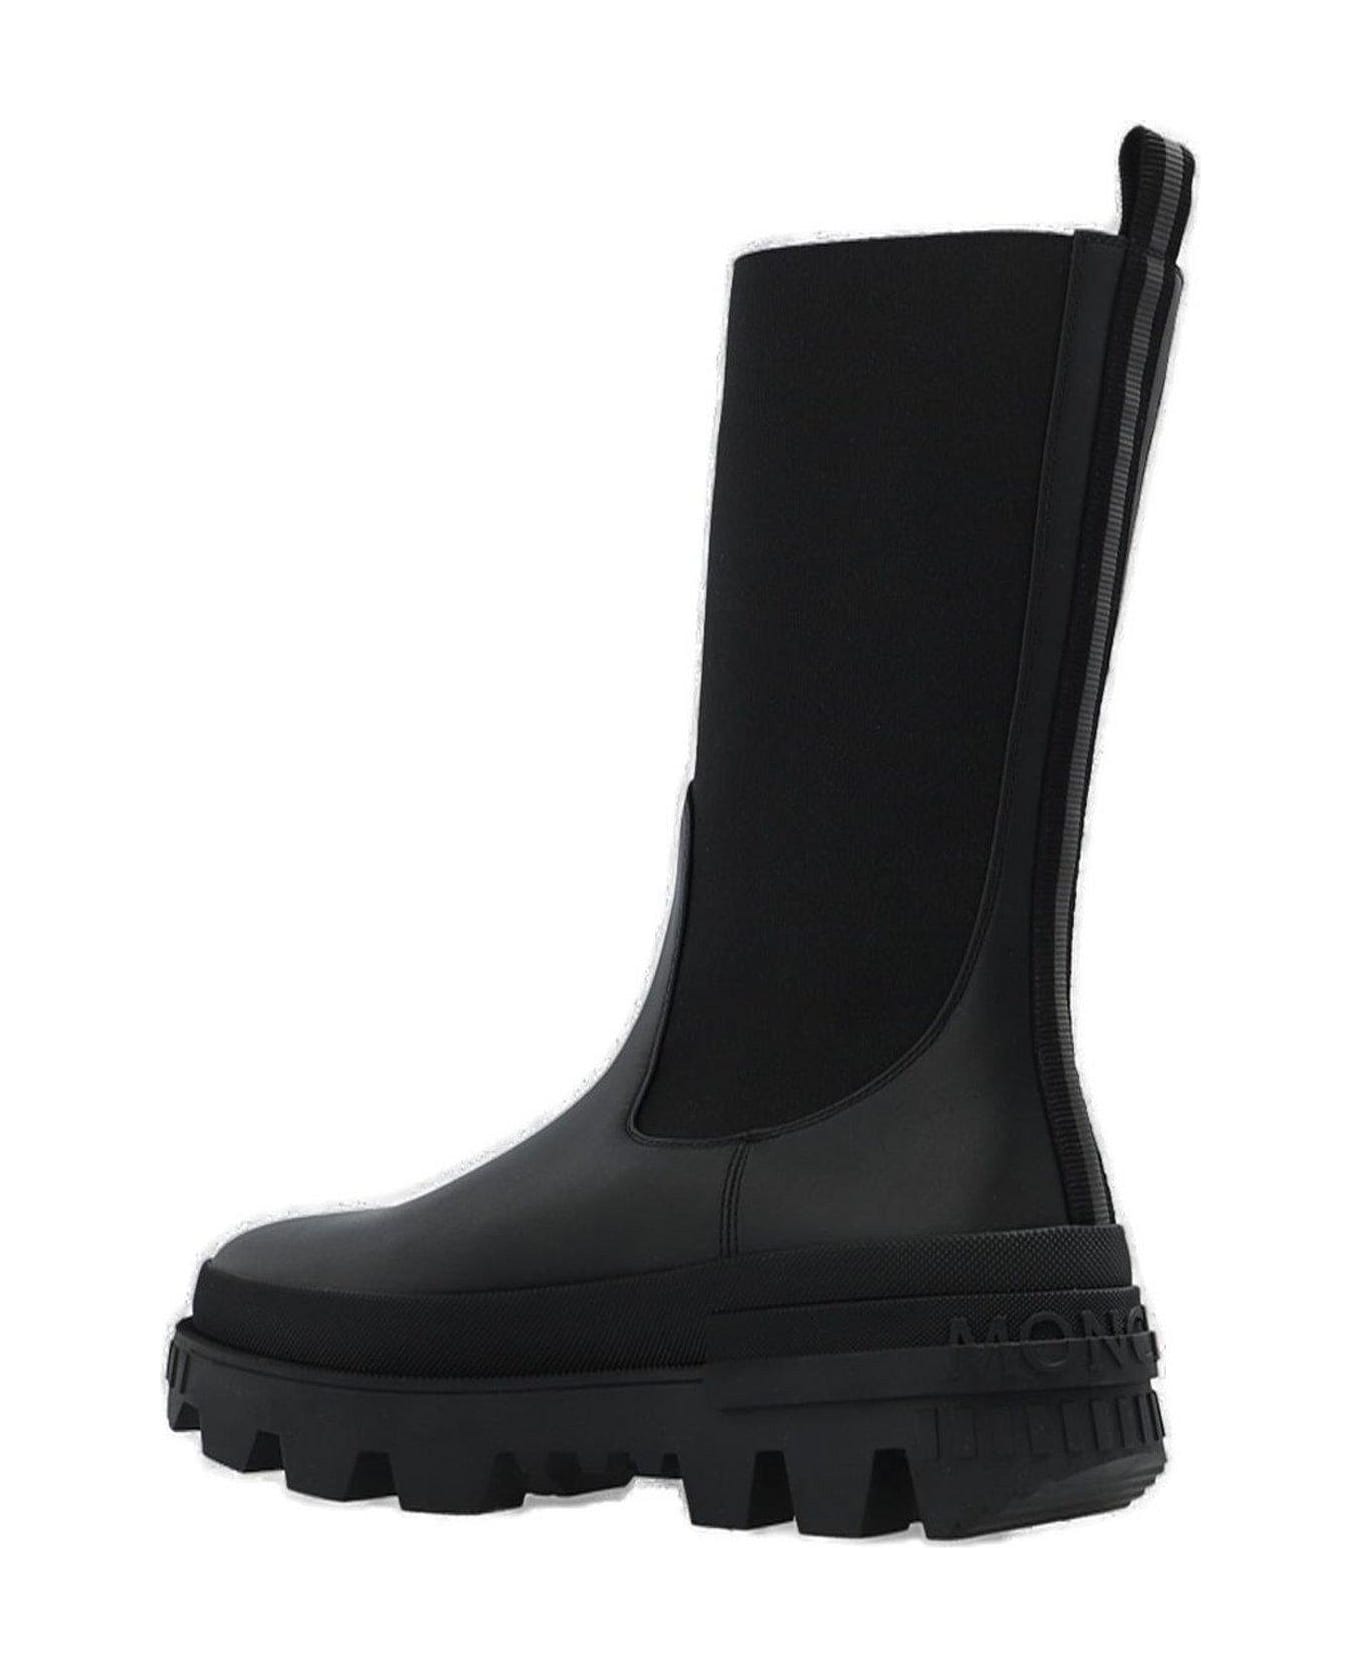 Moncler Neue Chelsea Ankle Boots - Black ブーツ